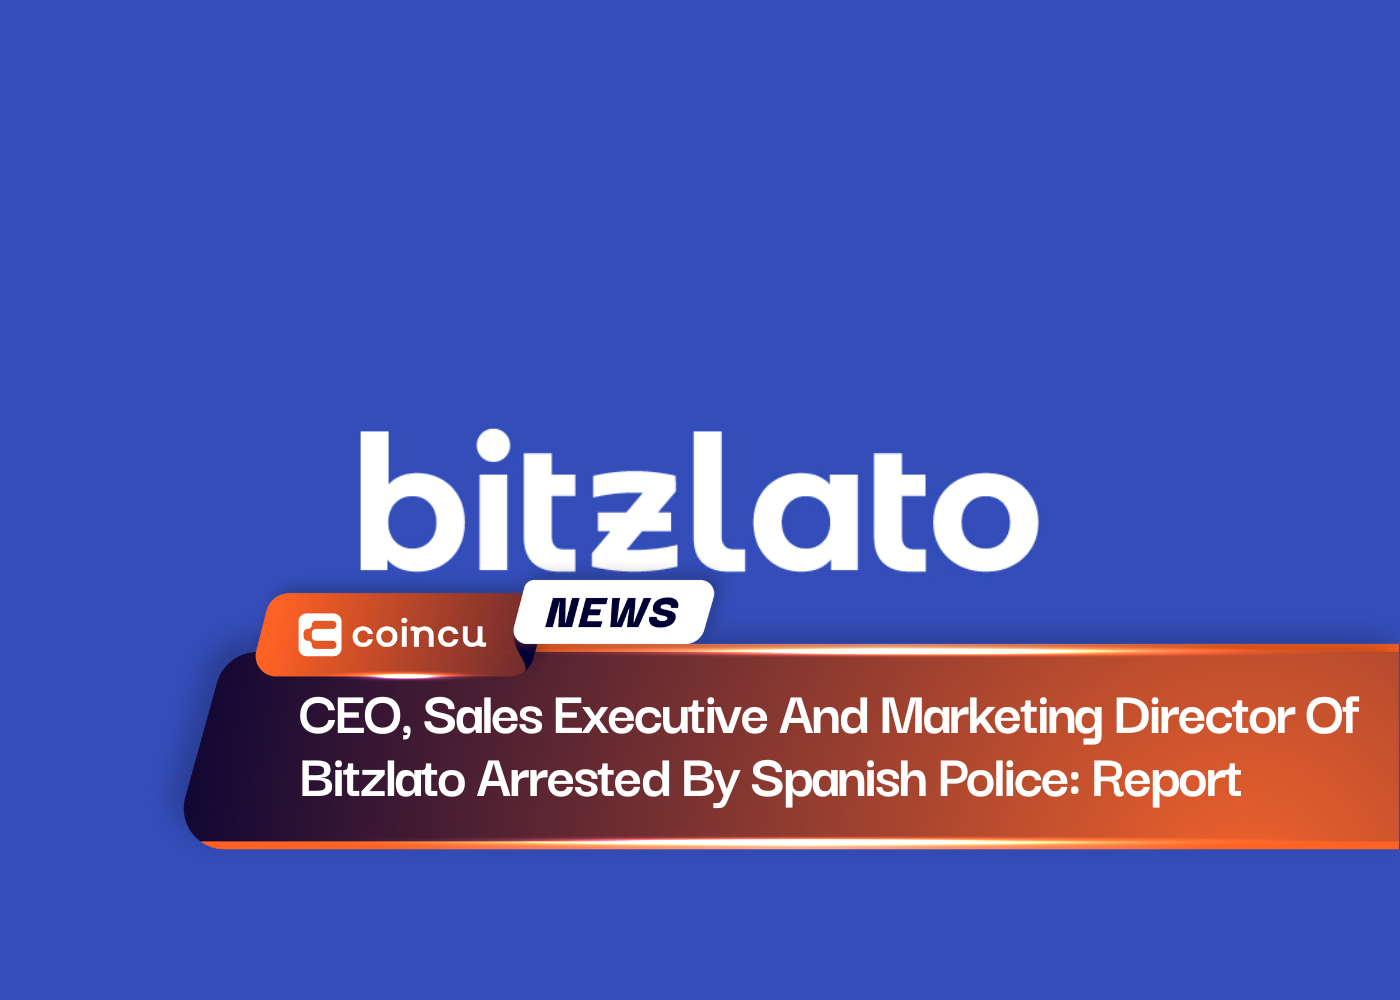 CEO, Sales Executive And Marketing Director Of Bitzlato Arrested By Spanish Police: Report